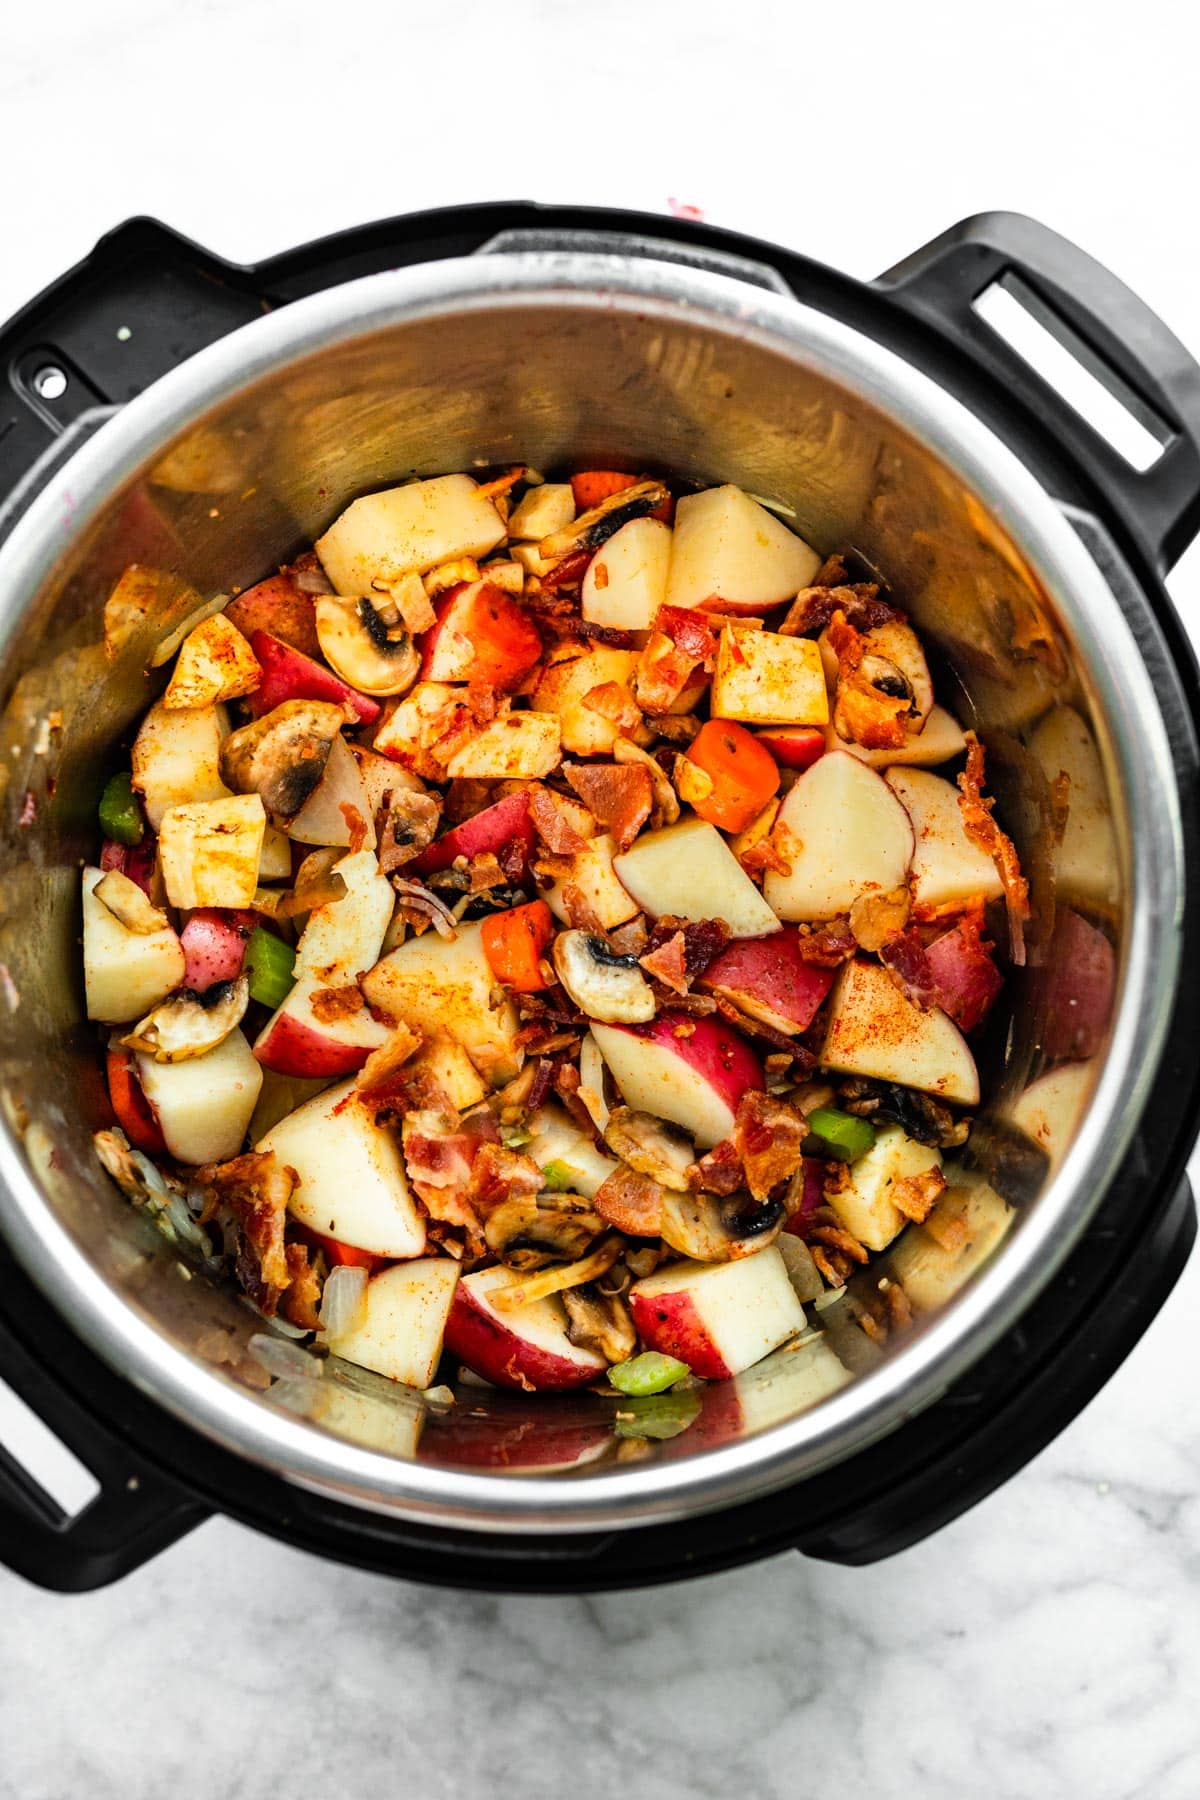 Potatoes, onions, celery, carrots, parsnips, and mushrooms in an instapot cooking.